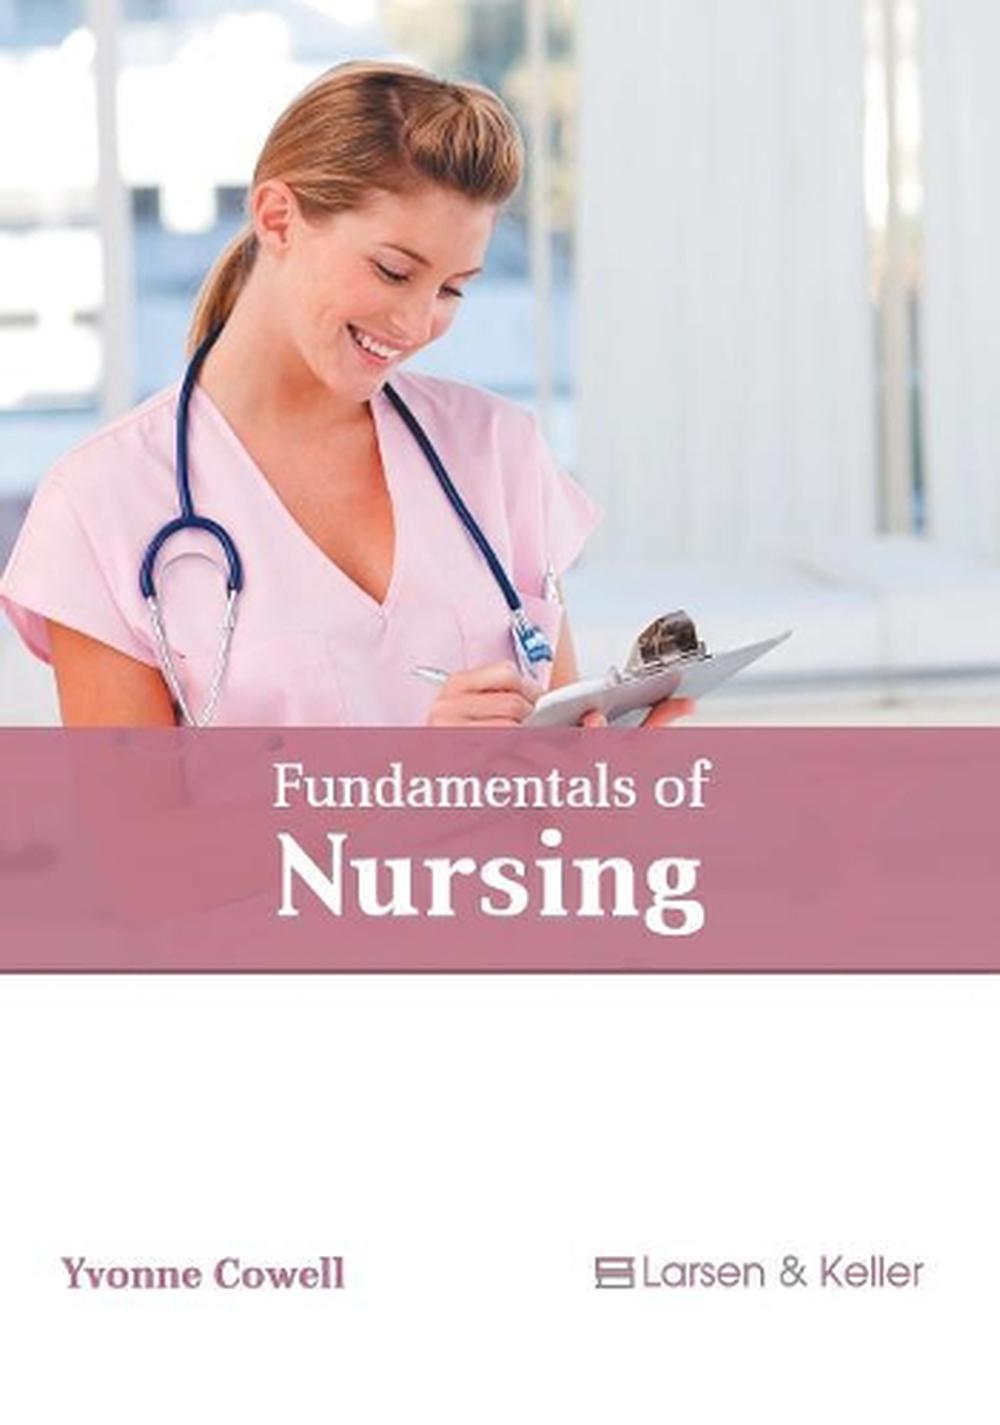 Fundamentals Of Nursing By Yvonne Cowell Hardcover Book Free Shipping